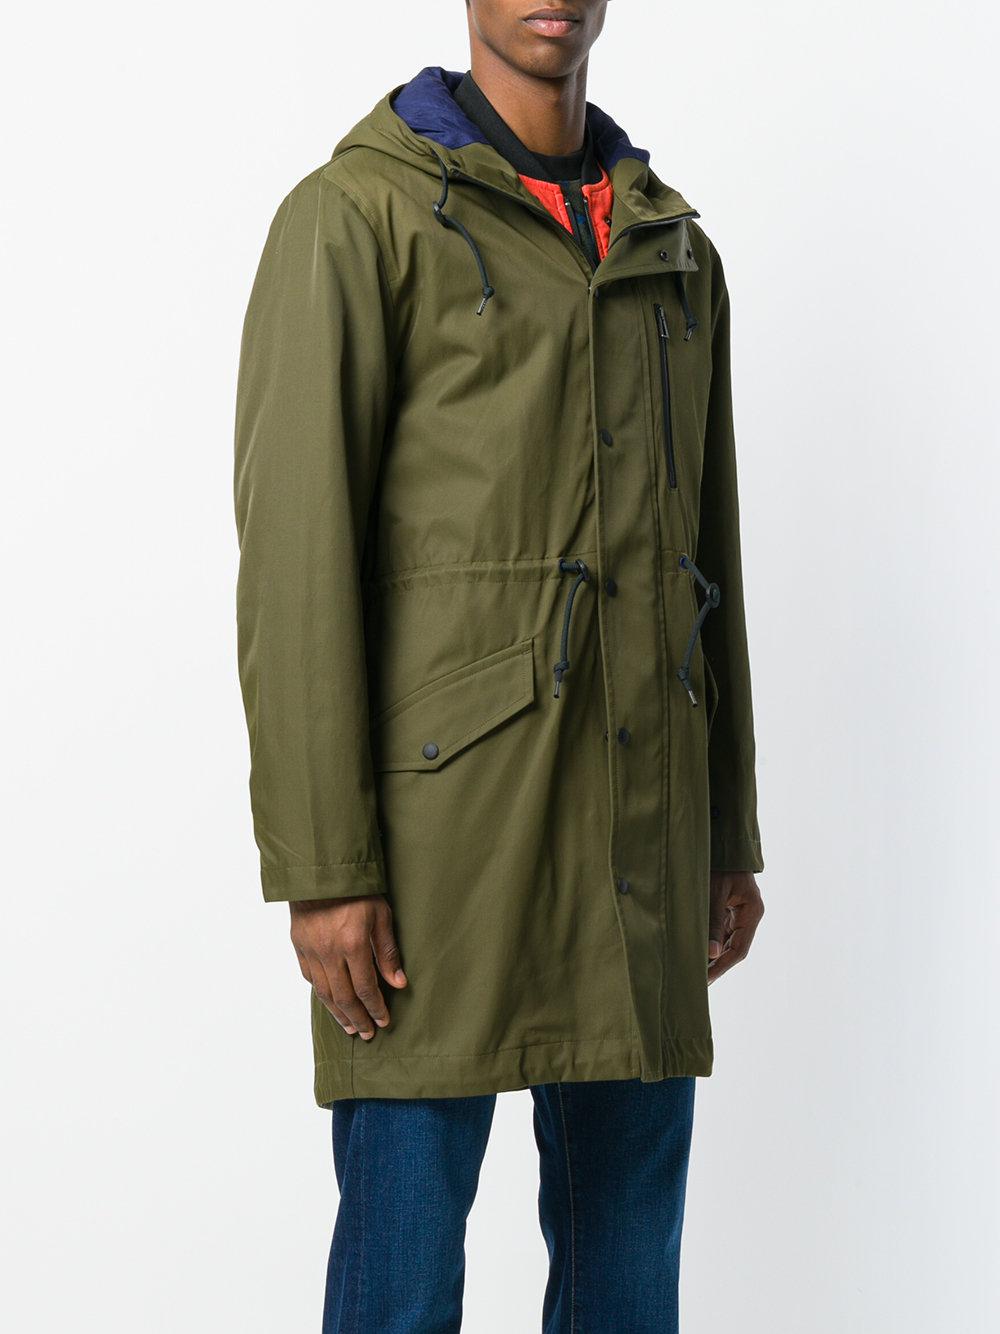 PS by Paul Smith Cotton 2-in-1 Parka in Green for Men - Lyst